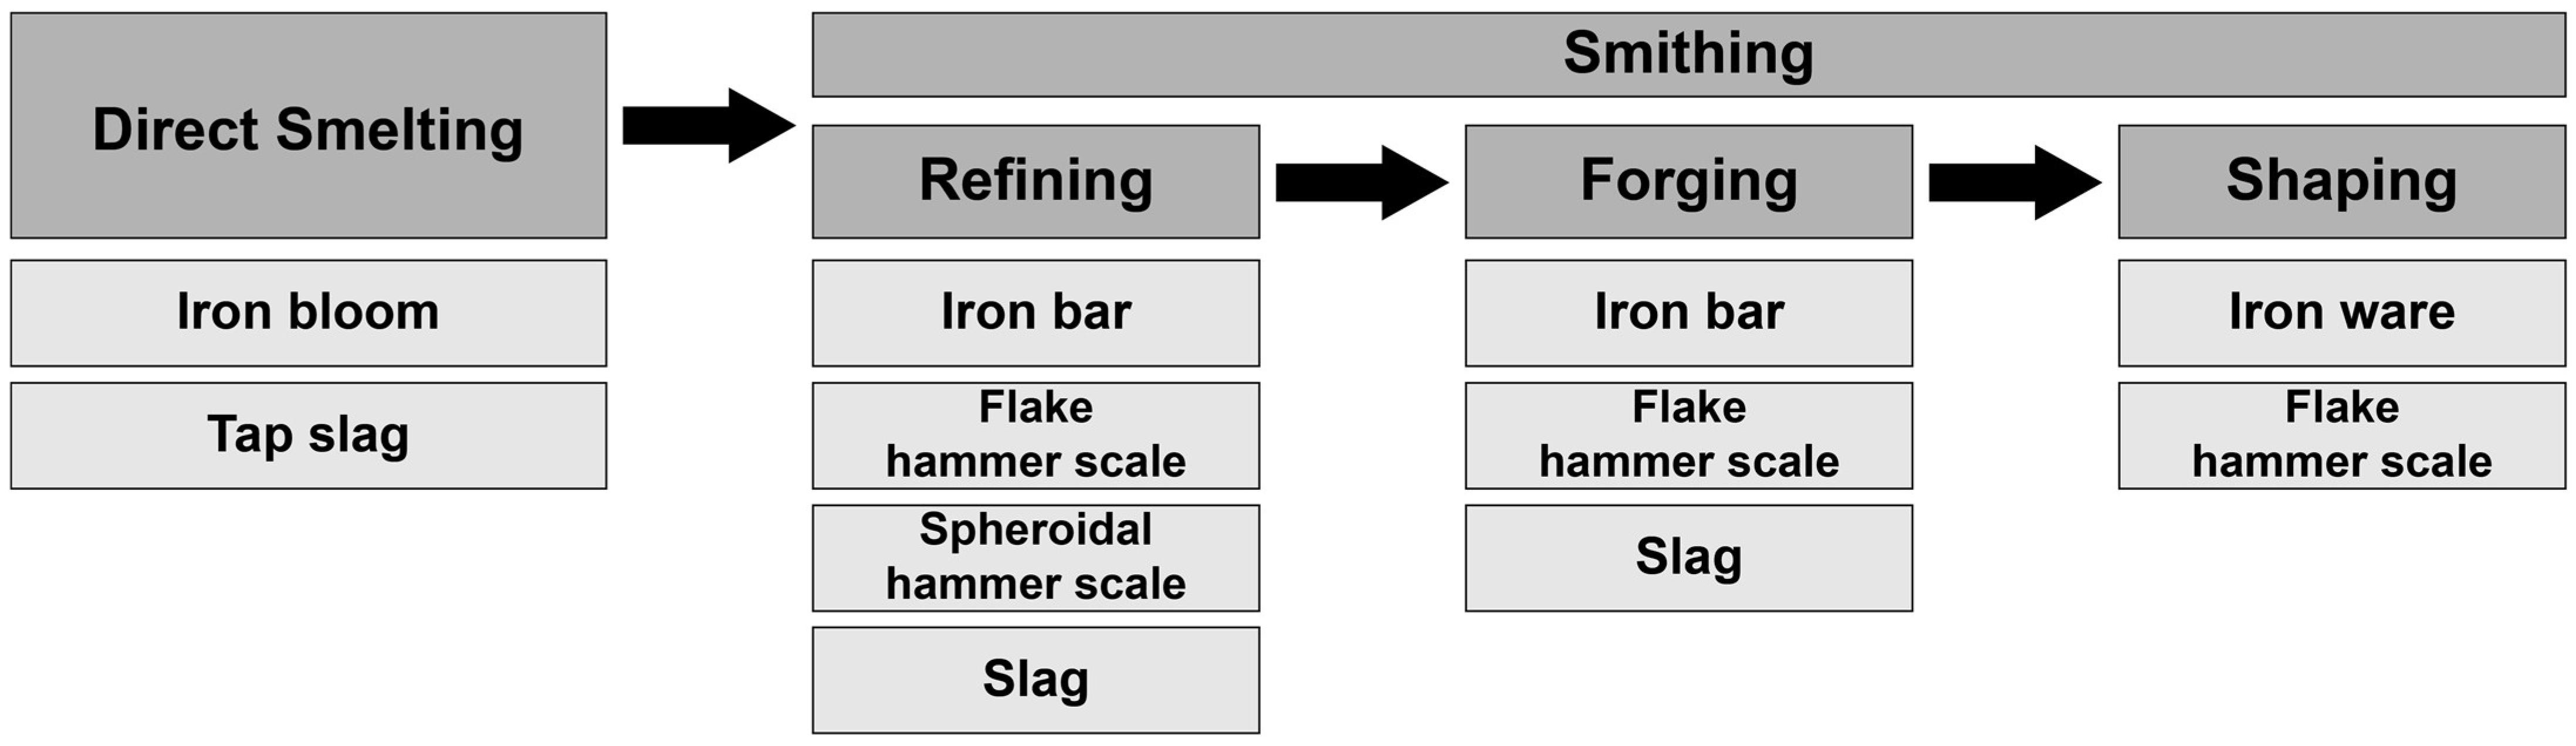 Materials | Free Full-Text | Smithing Processes Based on Hammer Scale  Excavated from the Third- to Fourth-Century Ancient Iron-Making Sites of  the Korean Peninsula